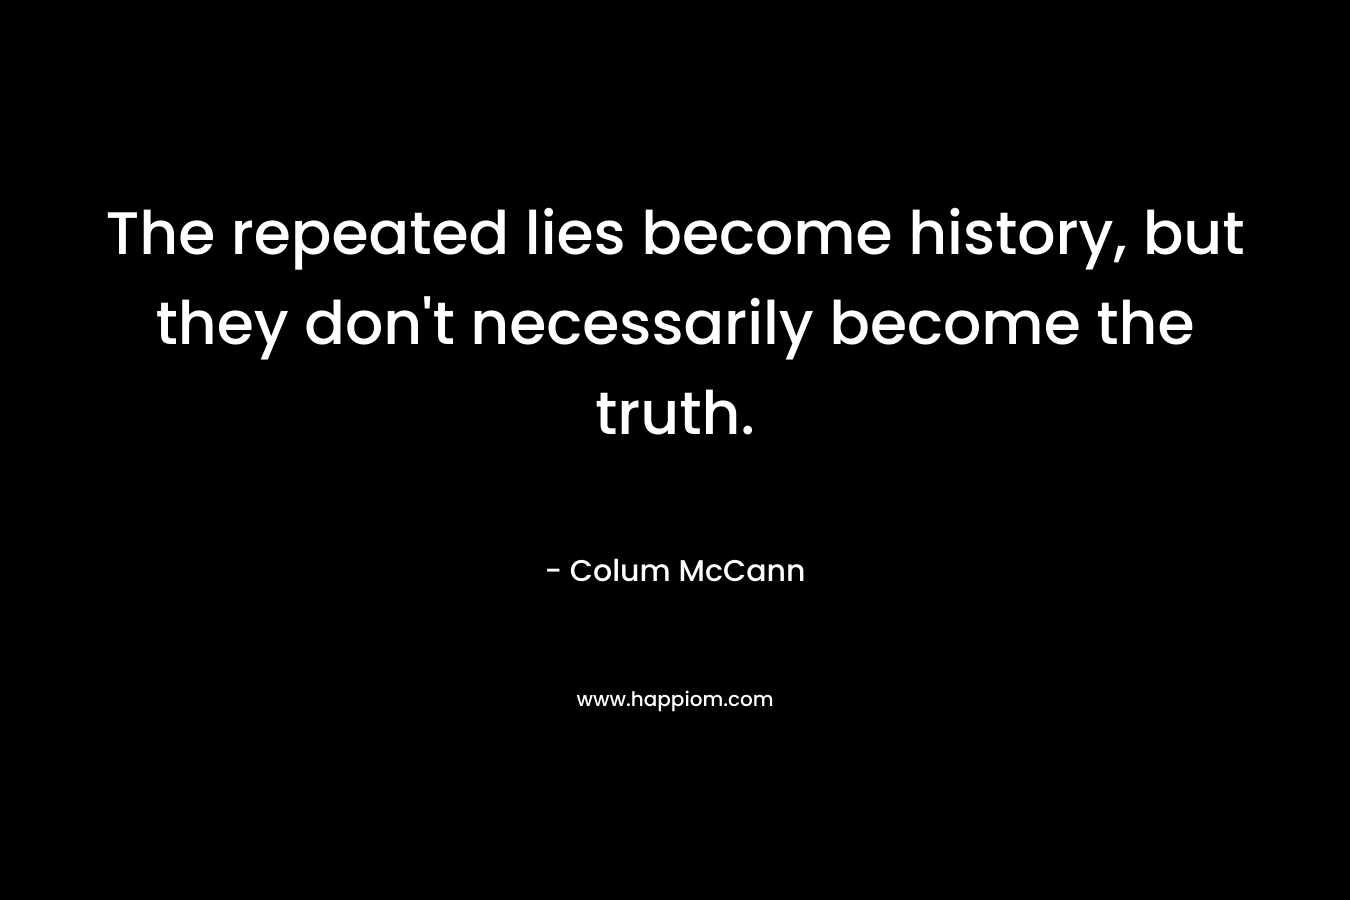 The repeated lies become history, but they don't necessarily become the truth.